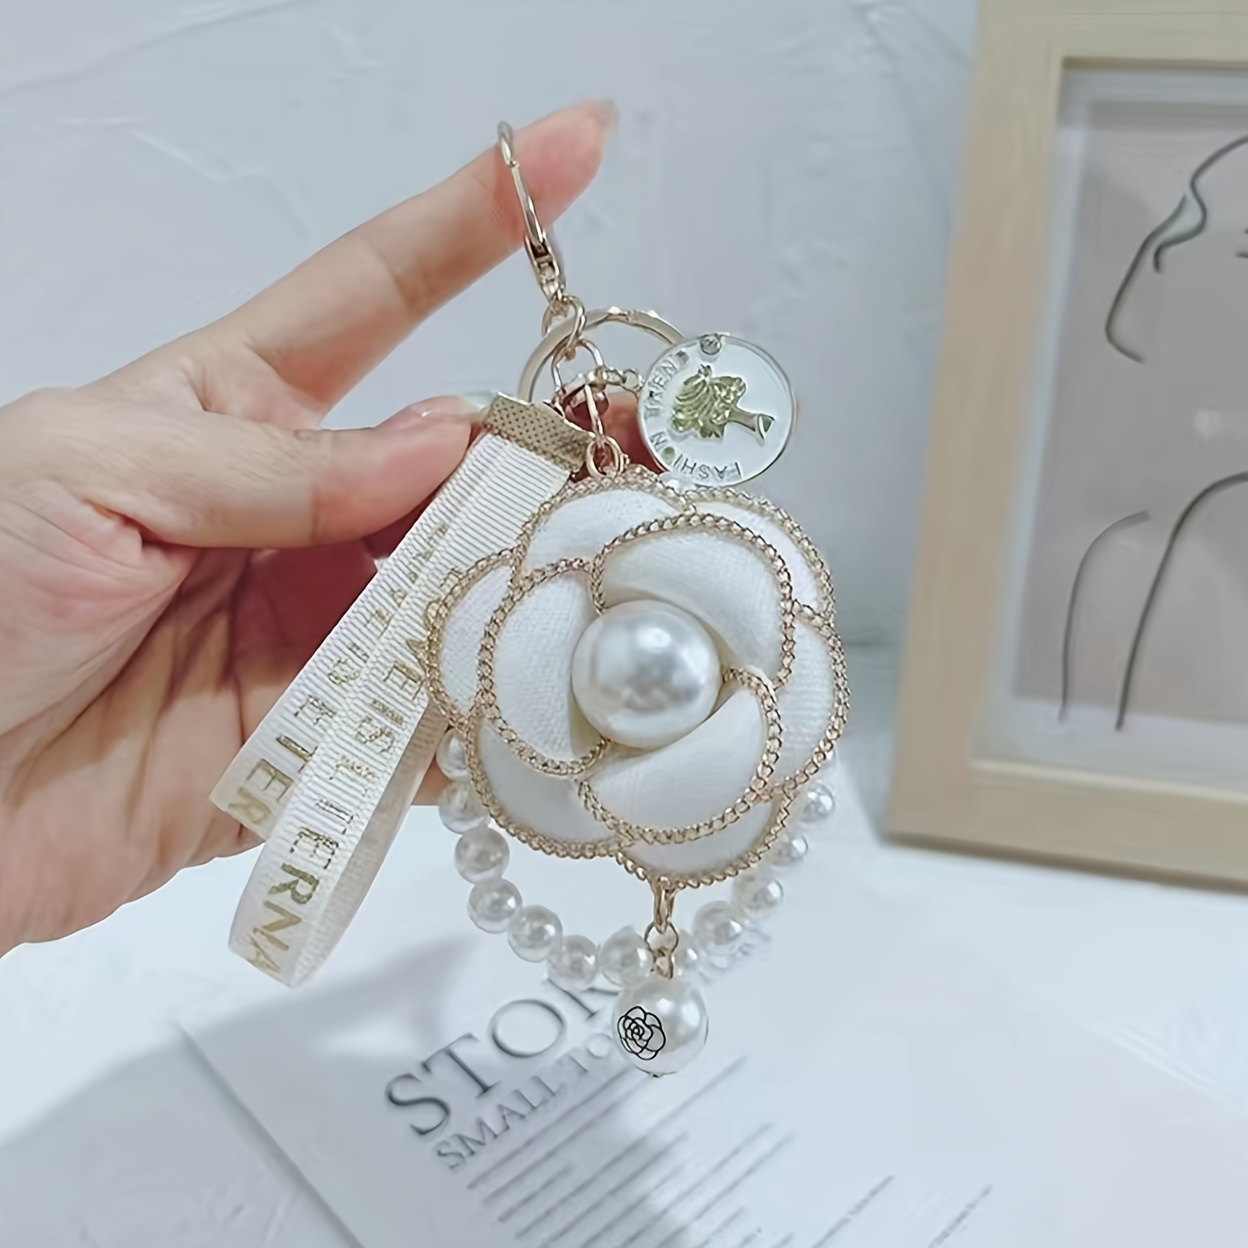 1Pc Twin Flowers Alloy Key Chain Pendant Cute Small White Flowers Letters Pearl  Accessories for Women and Girls' Purse Bag Backpack Headphone Sets Car  Charm, Bag Accessories